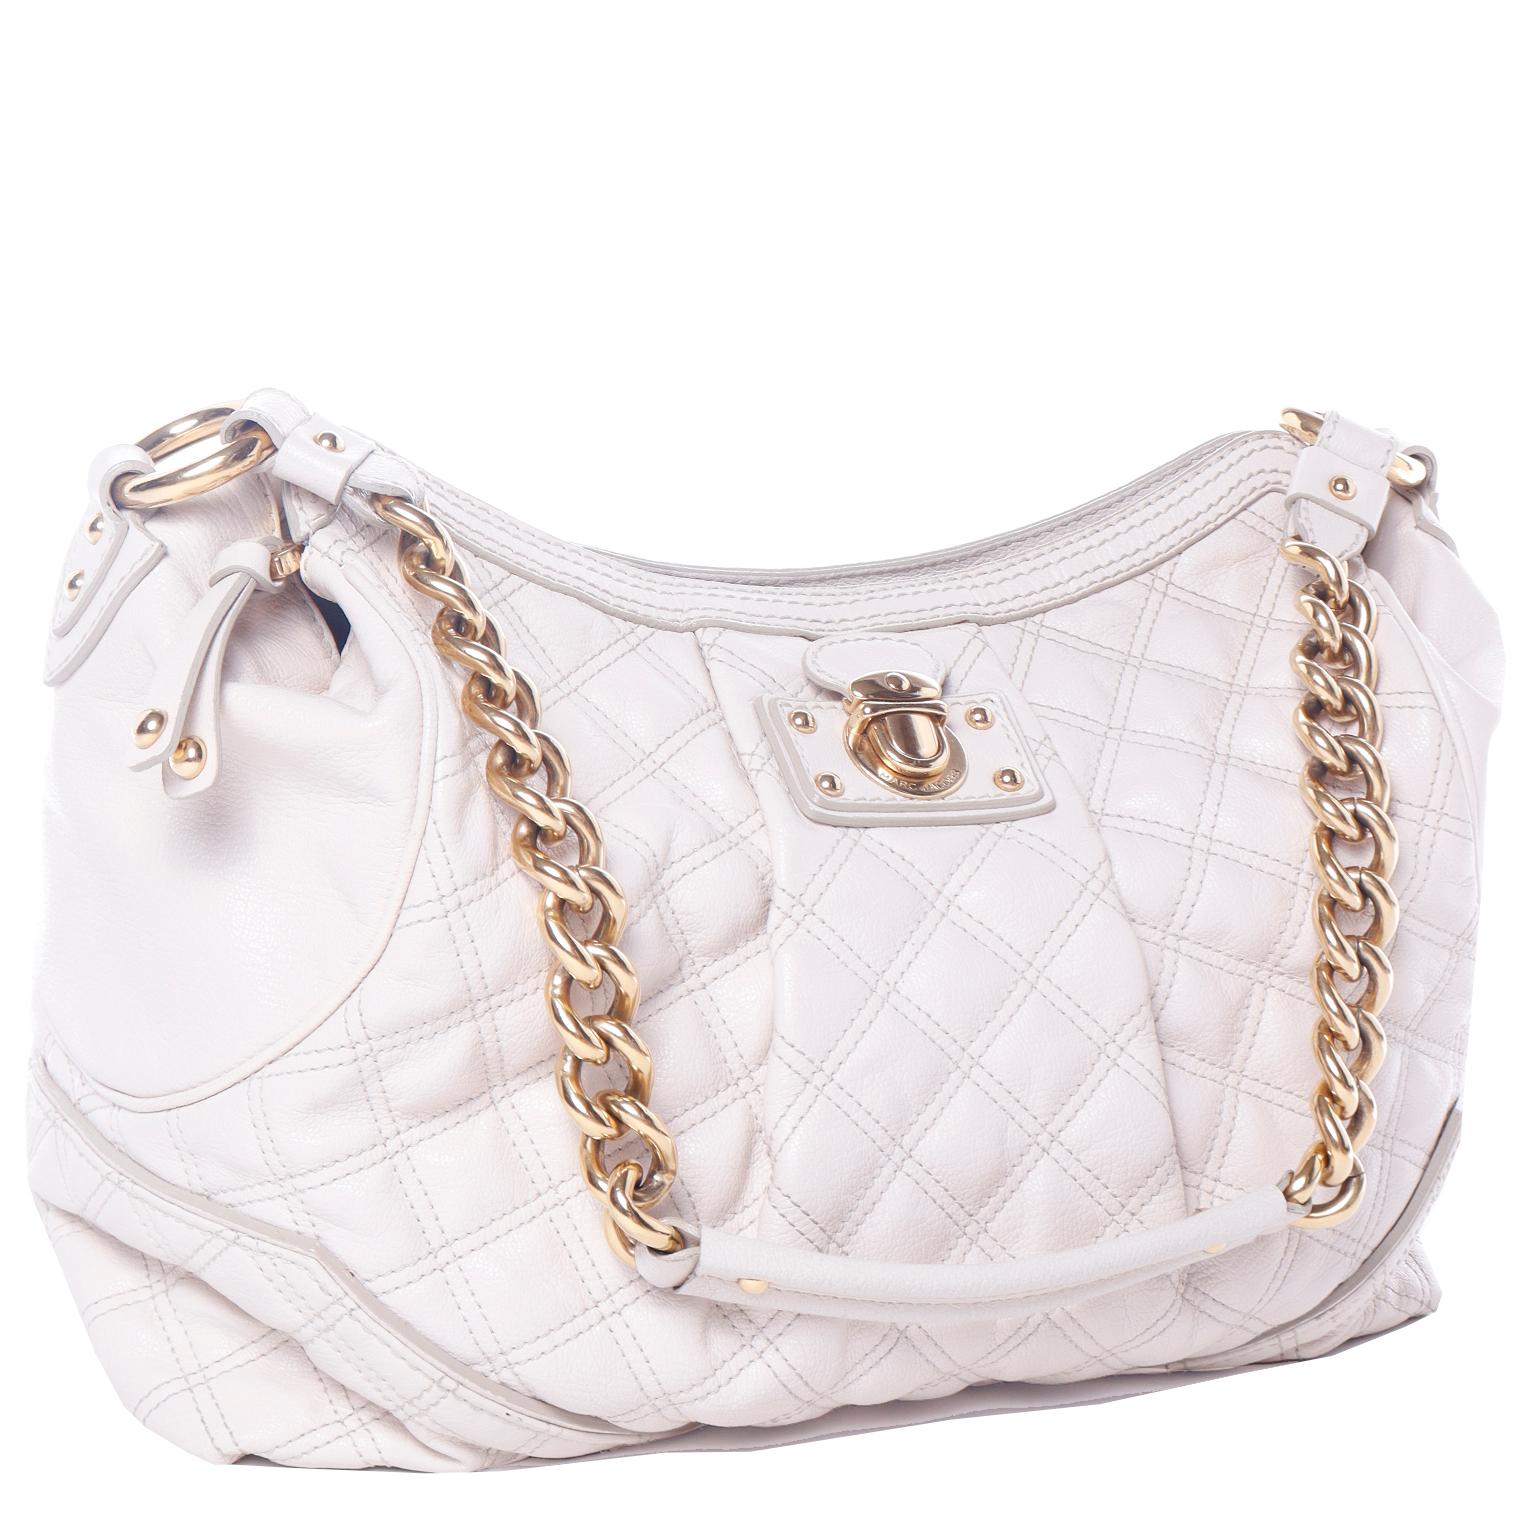 Women's Marc Jacobs Handbag Bone Quilted Leather Zip Top Hobo Bag With Gold Chain Strap For Sale